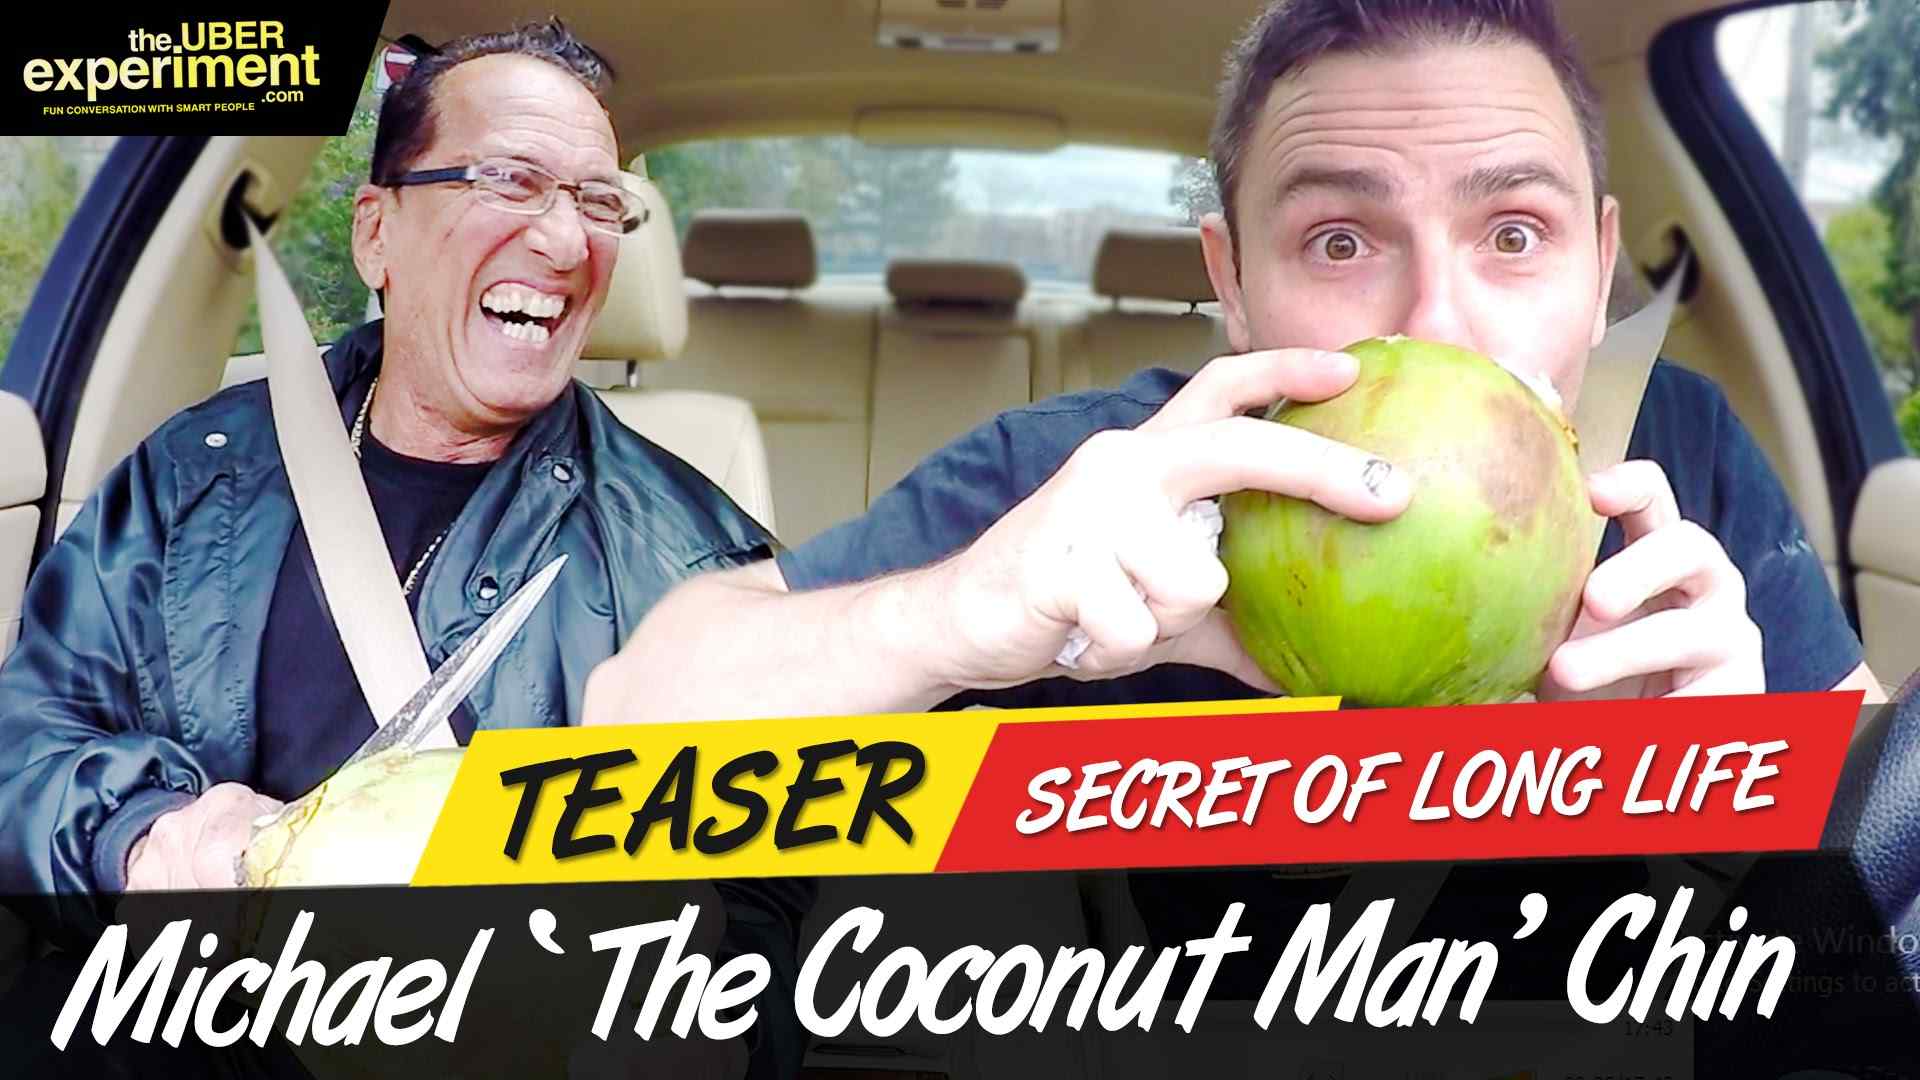 SECRET TO LONG LIFE - Musician, Actor & Big Party Coconut Man MICHAEL CHIN Rides The Uber Experiment